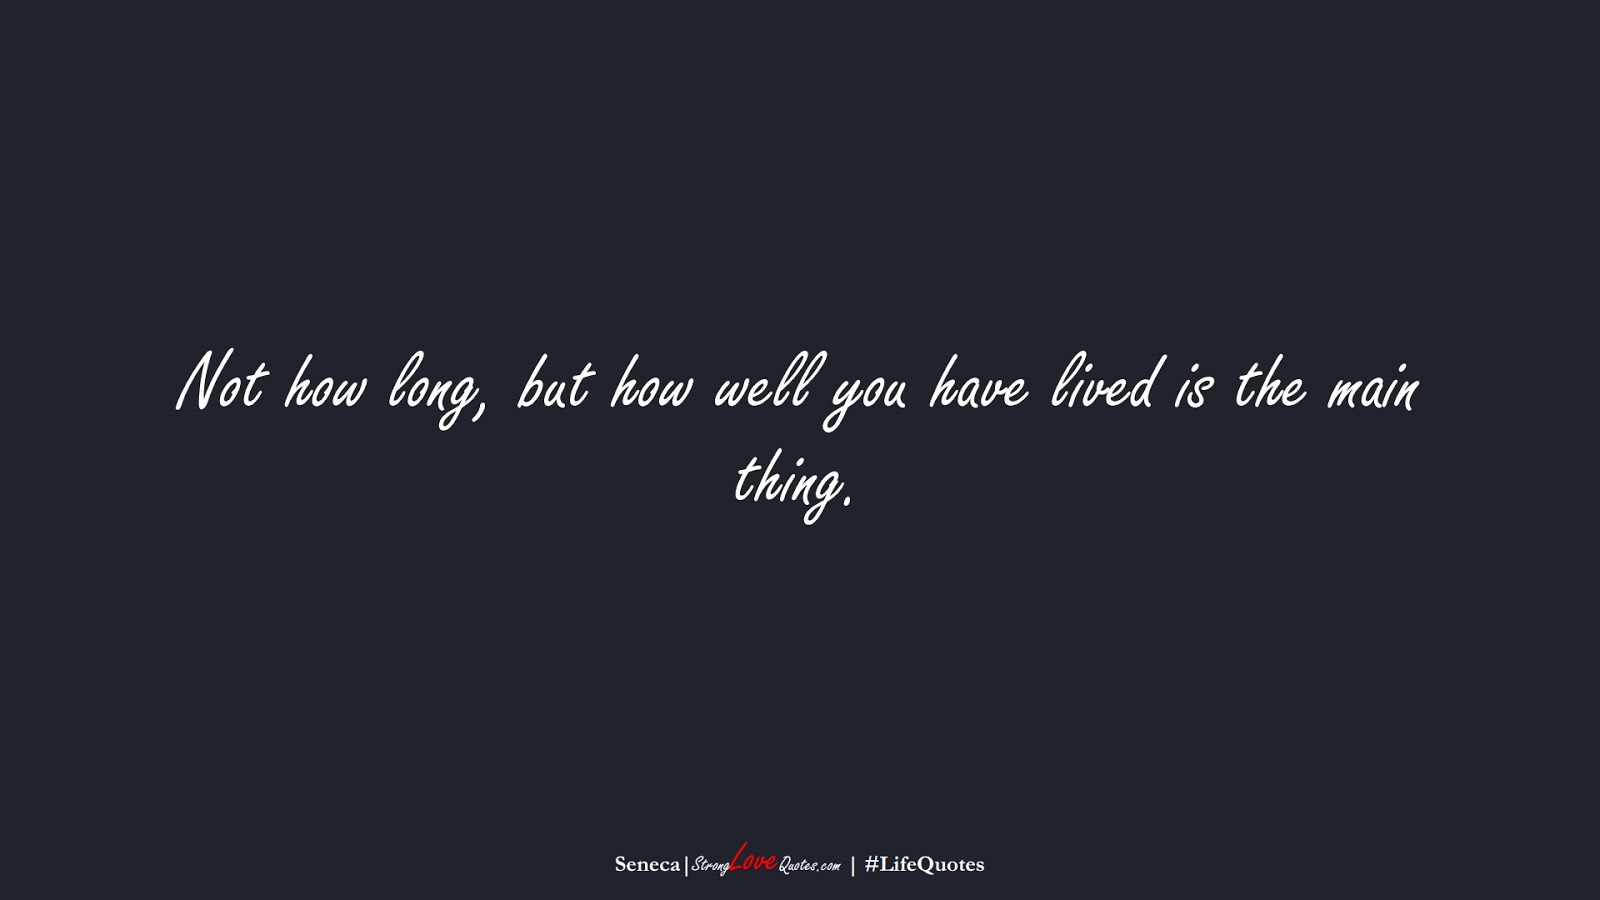 Not how long, but how well you have lived is the main thing. (Seneca);  #LifeQuotes